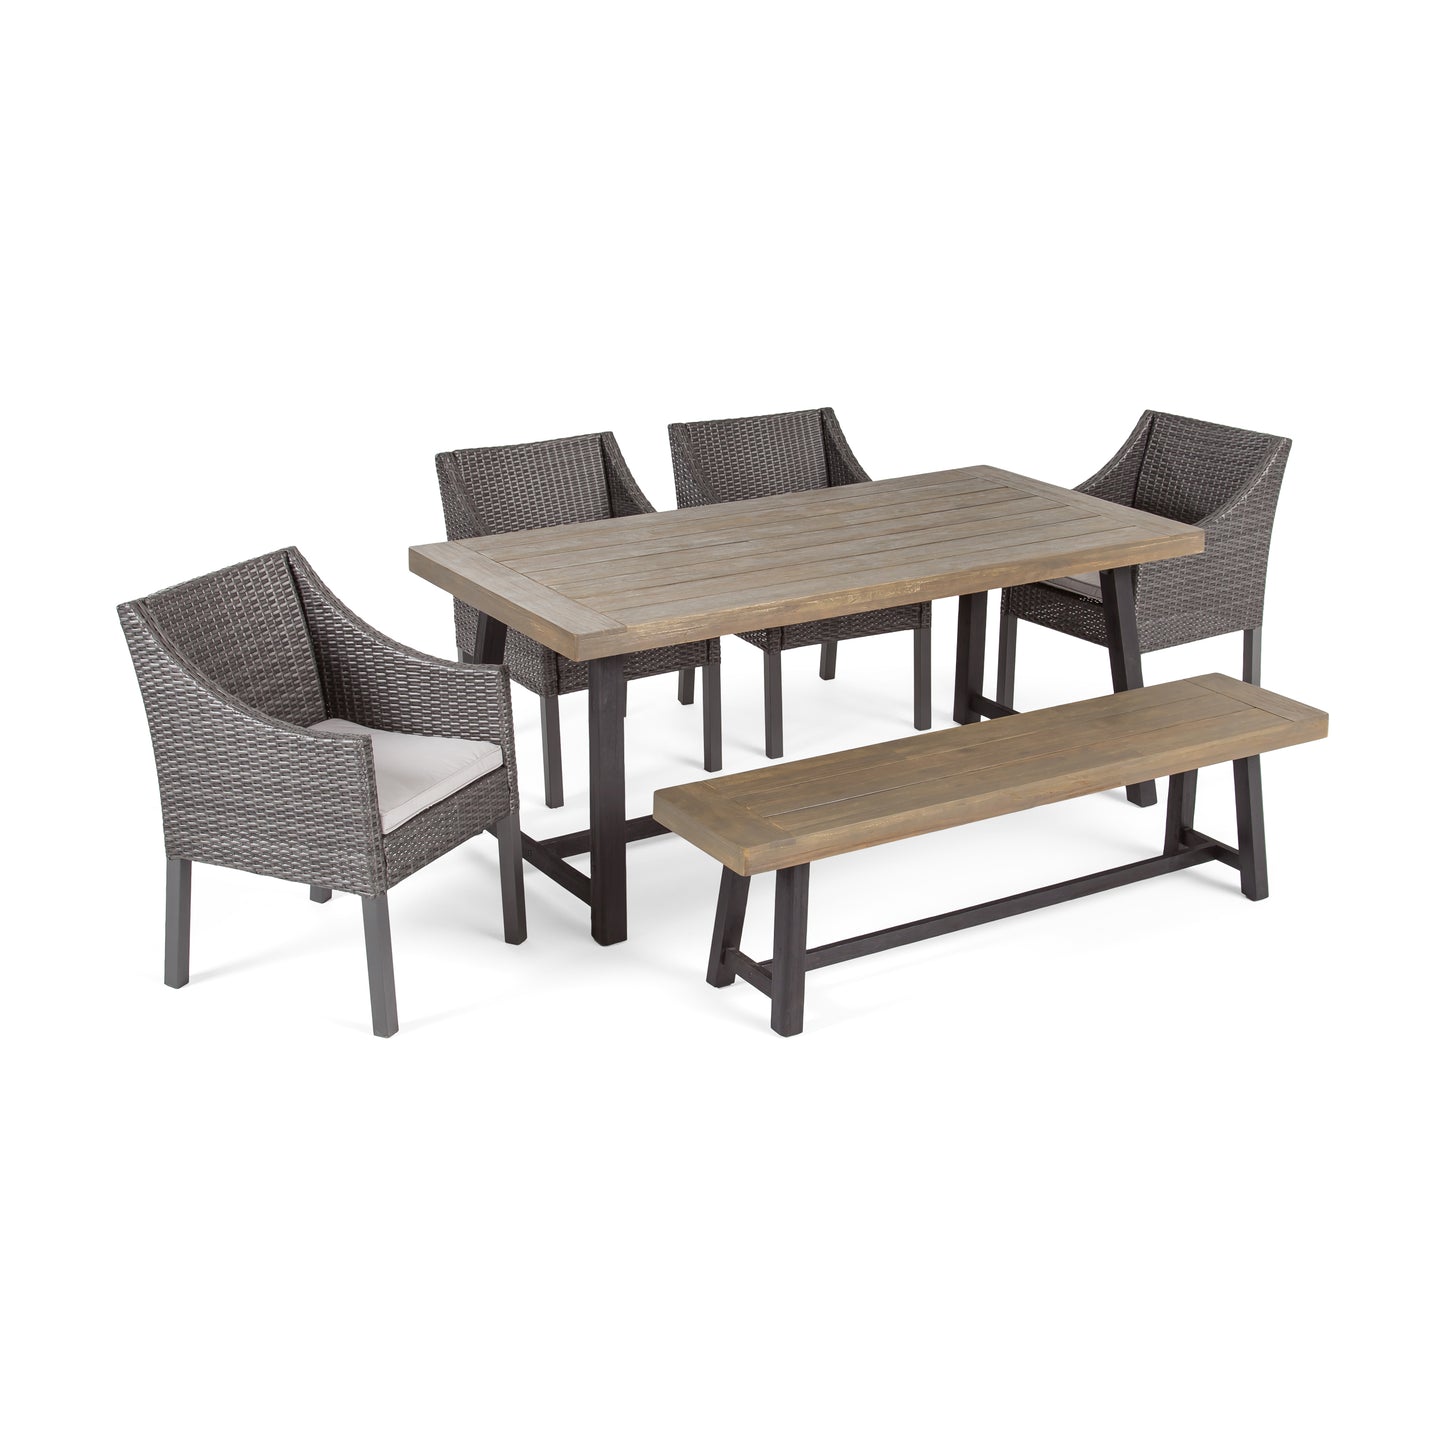 Anniston Outdoor 6 Piece Dining Set with Wicker Chairs and Bench